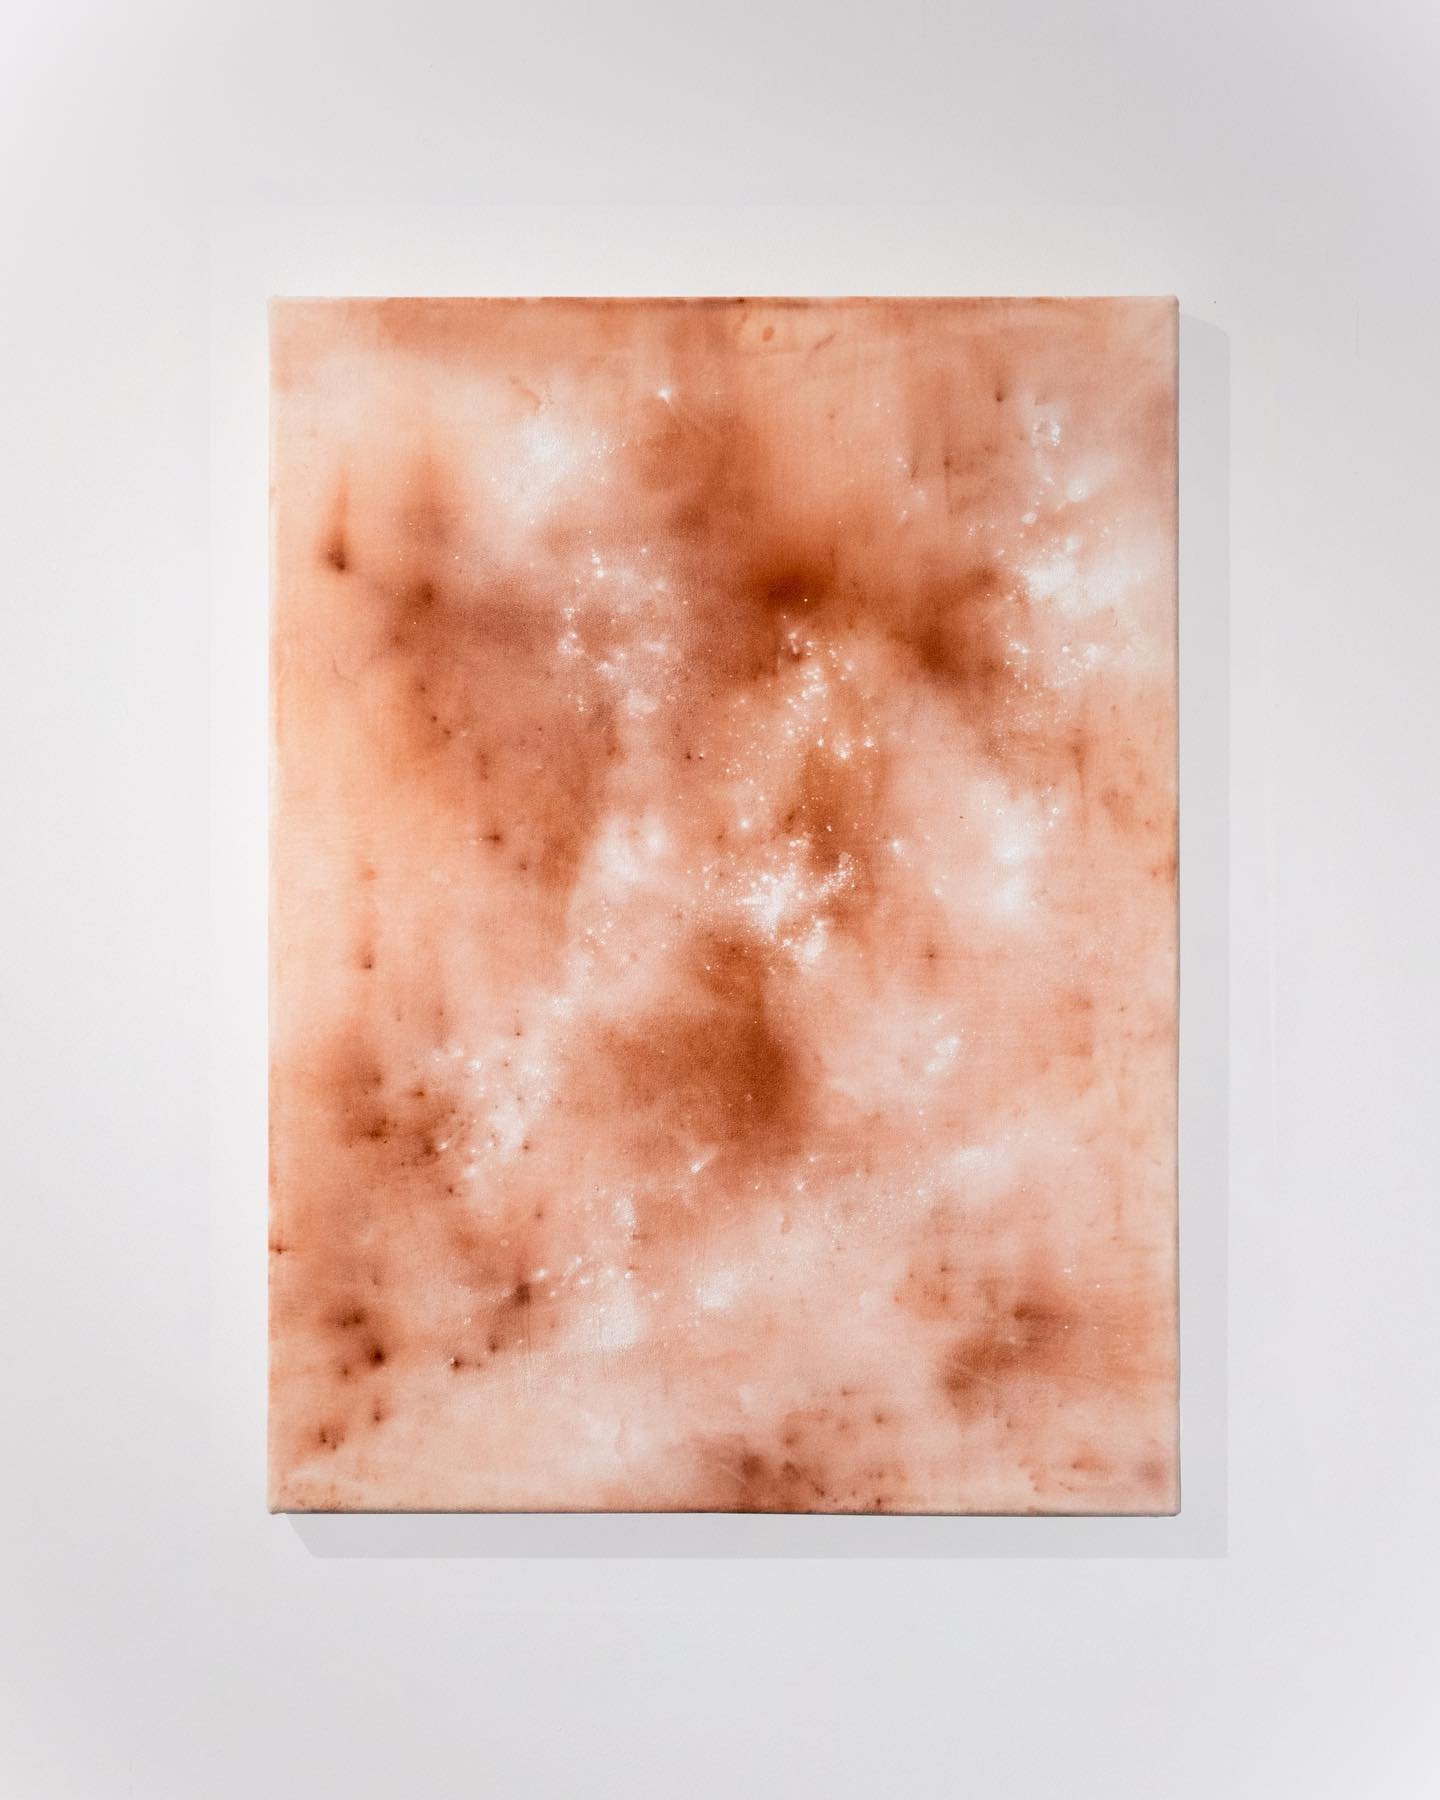 MANUEL TAINHA @manueltainha 
Flair, 2024
Pigment, lime and copper powder on velvet
80 x 60cm
More info on request 

&lsquo;ABALO&rsquo;, by @manueltainha and @matildetravassos 

The inevitable finiteness of being and things, and the obsession with th